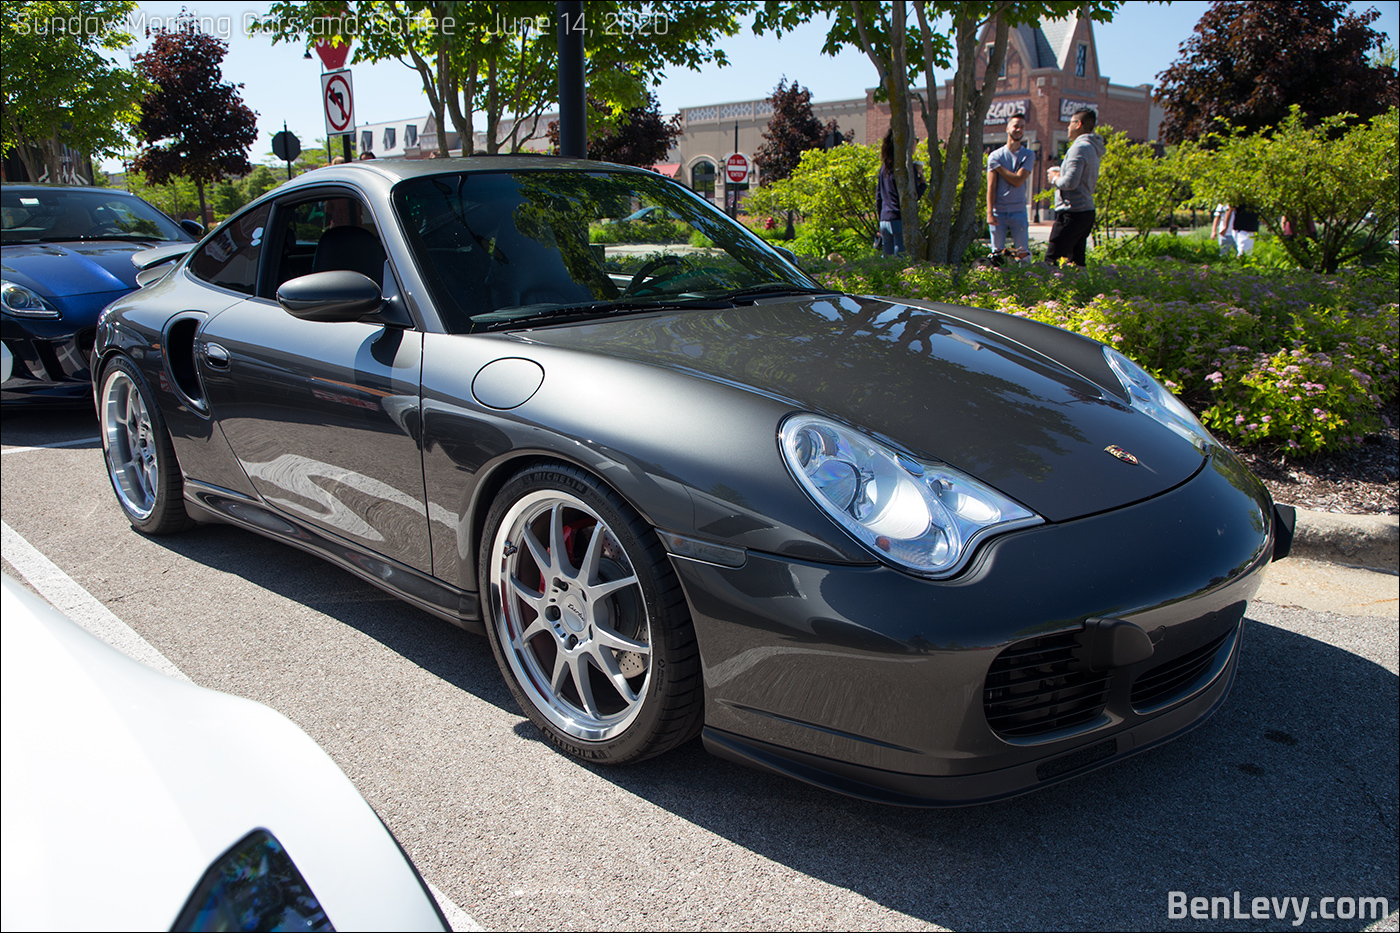 Porsche 996 Turbo at Sunday Morning Cars and Coffee